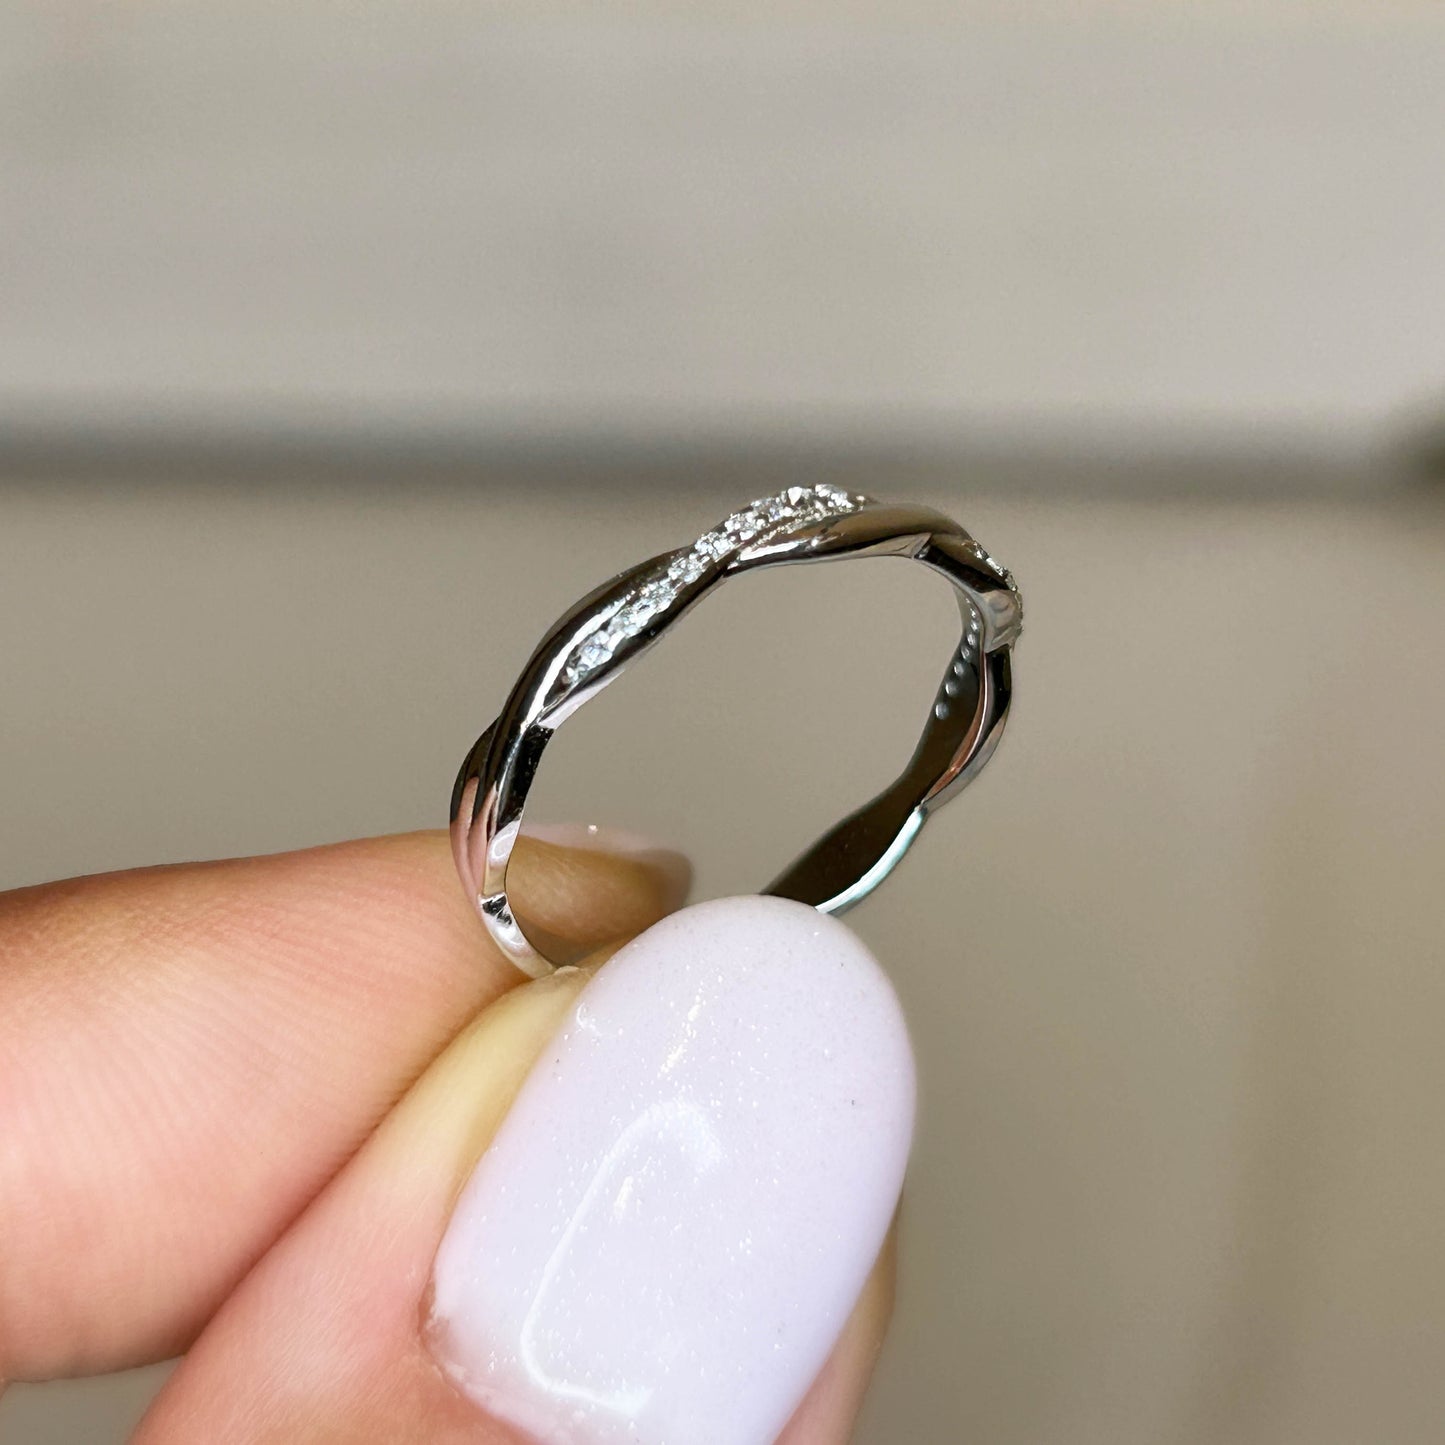 Wavy Silver Ring Size 6